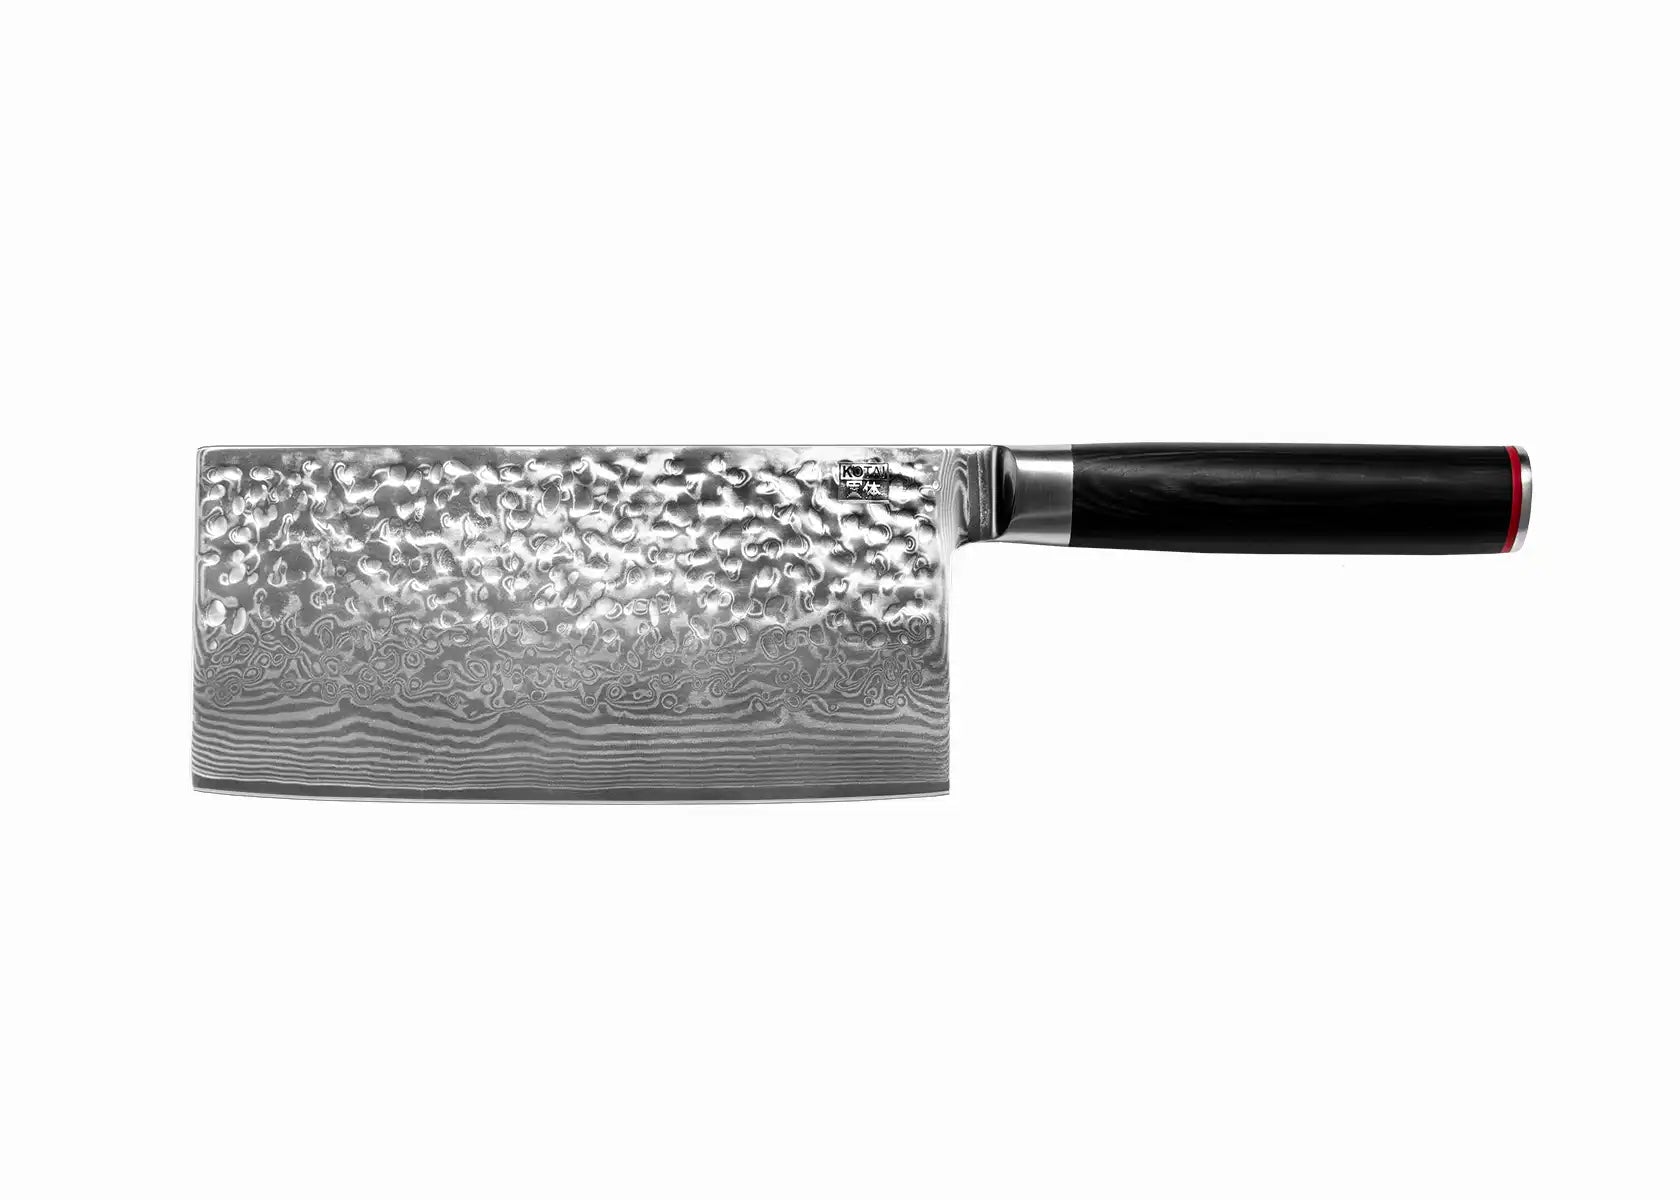 Damascus Cleaver Knife - Pakka Collection - 190 mm blade